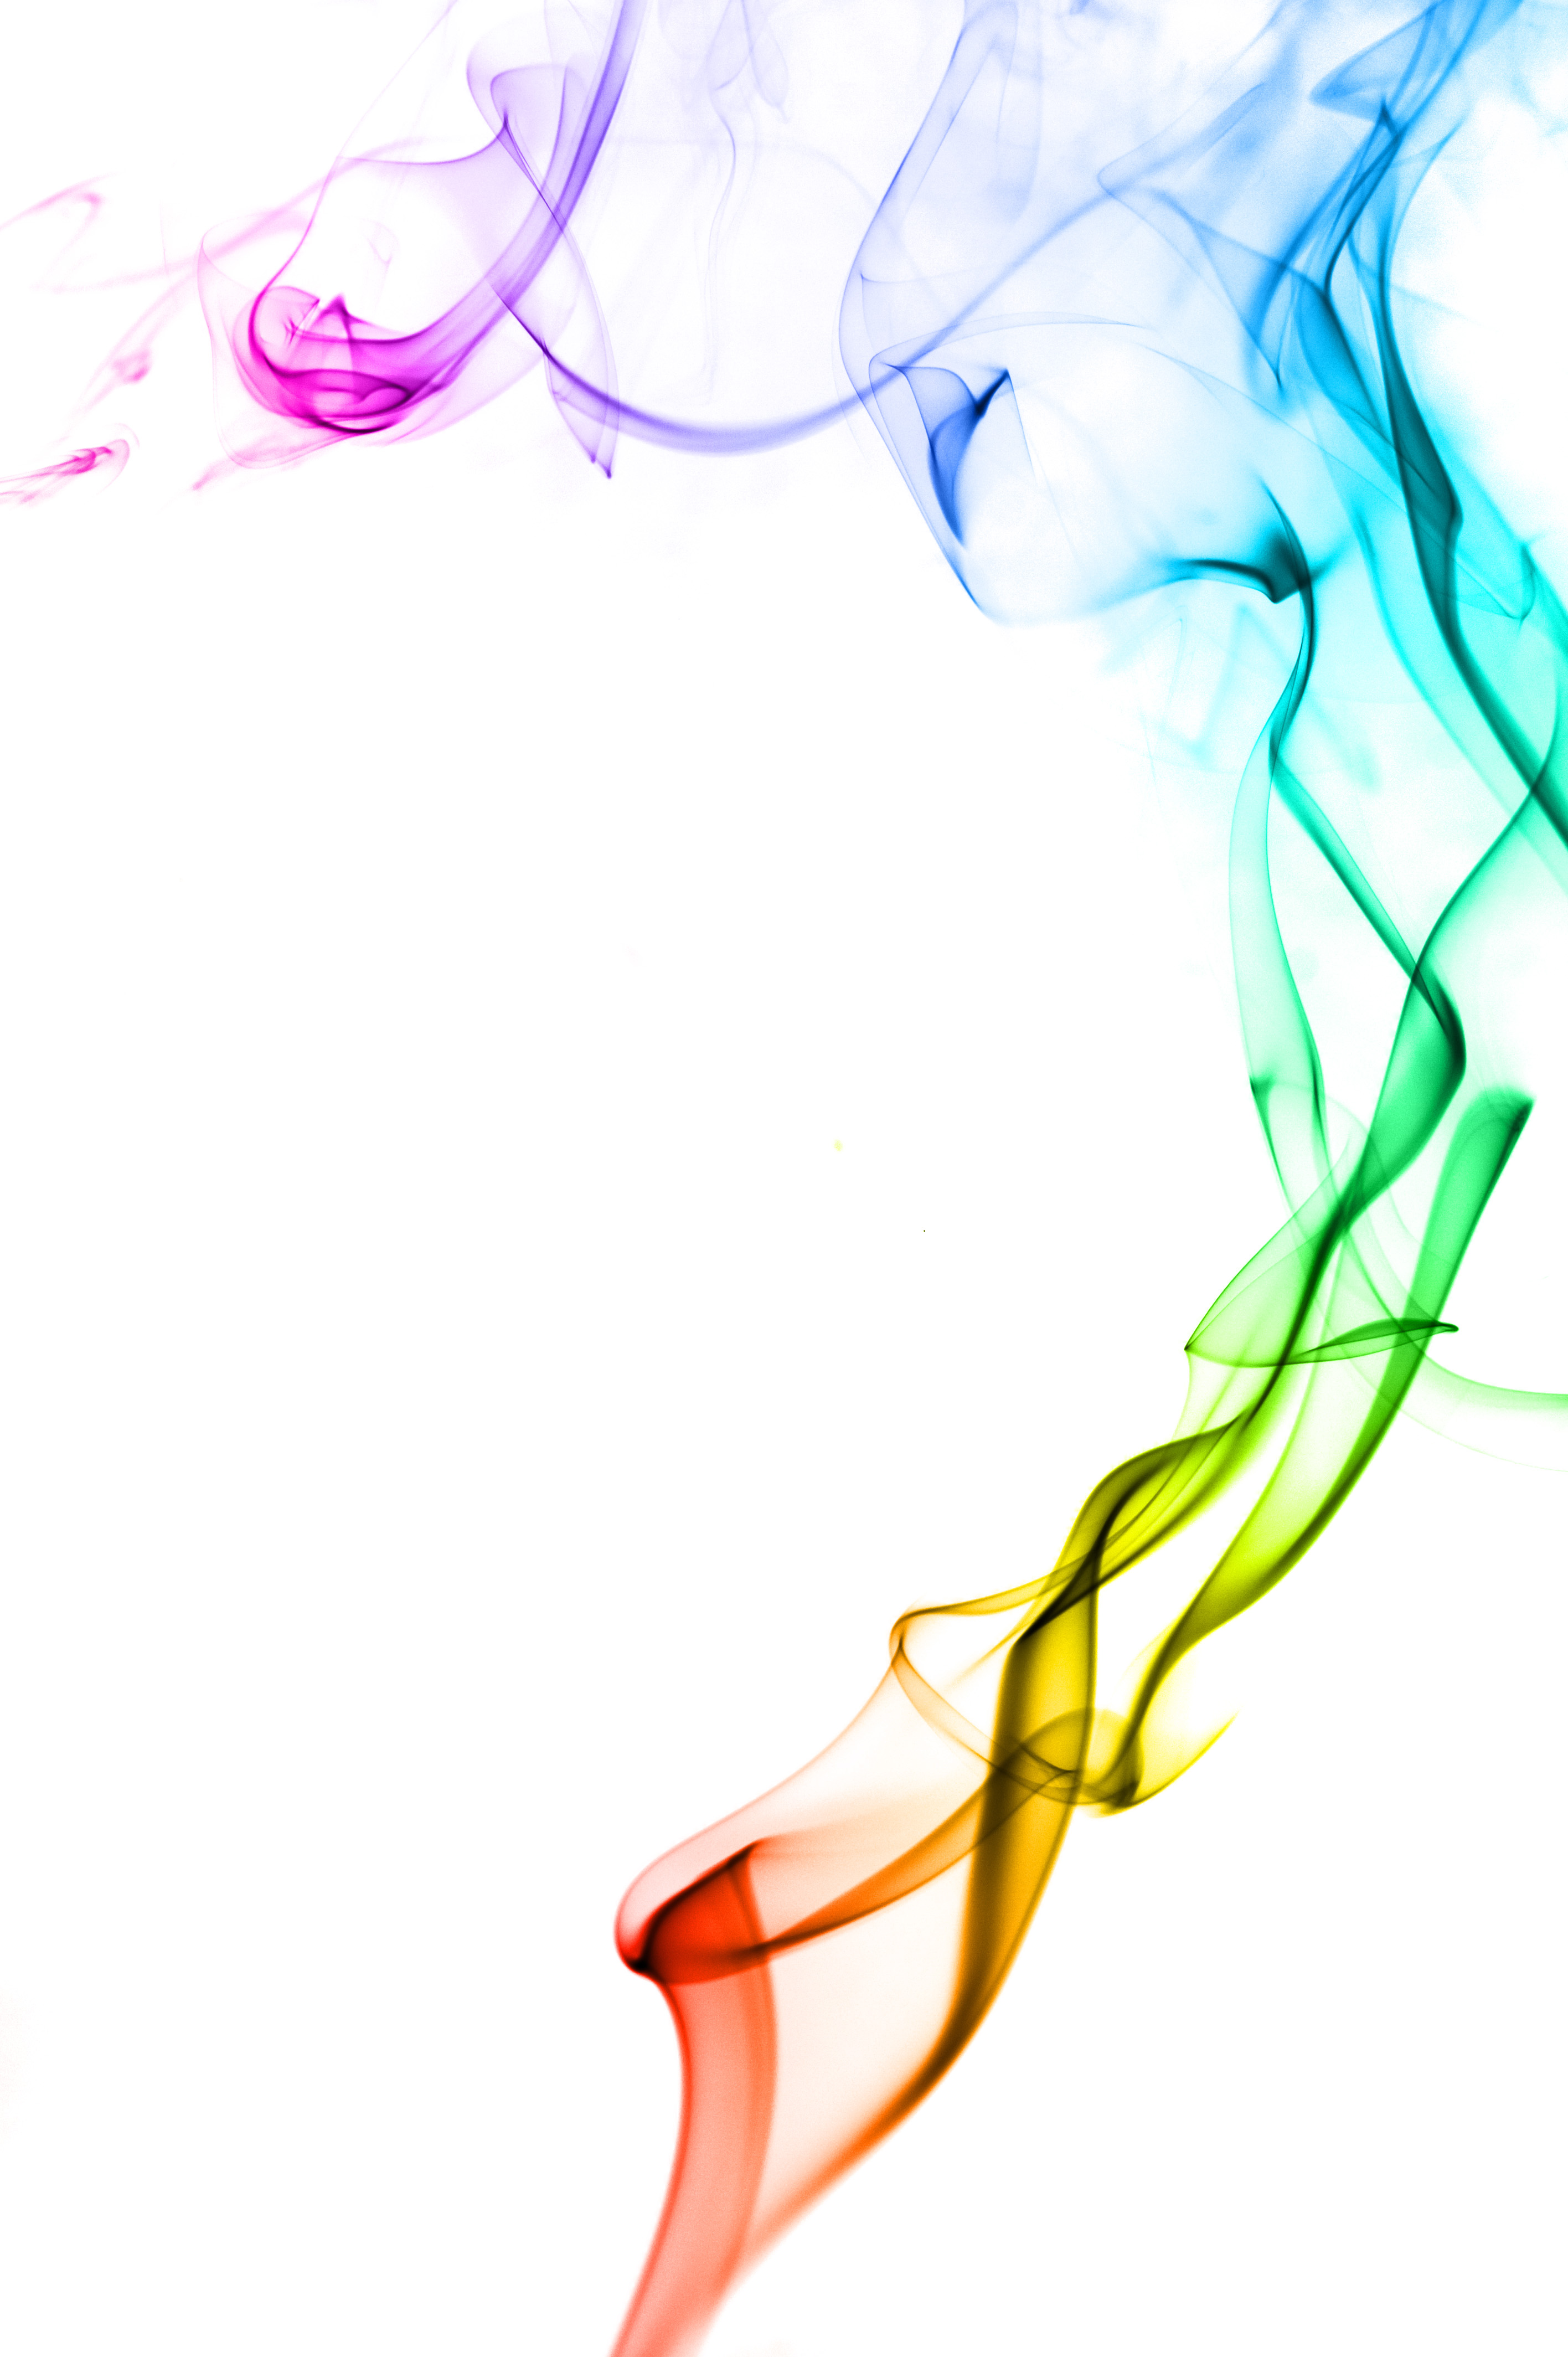 smoke spectrum | Free backgrounds and textures | Cr103.com